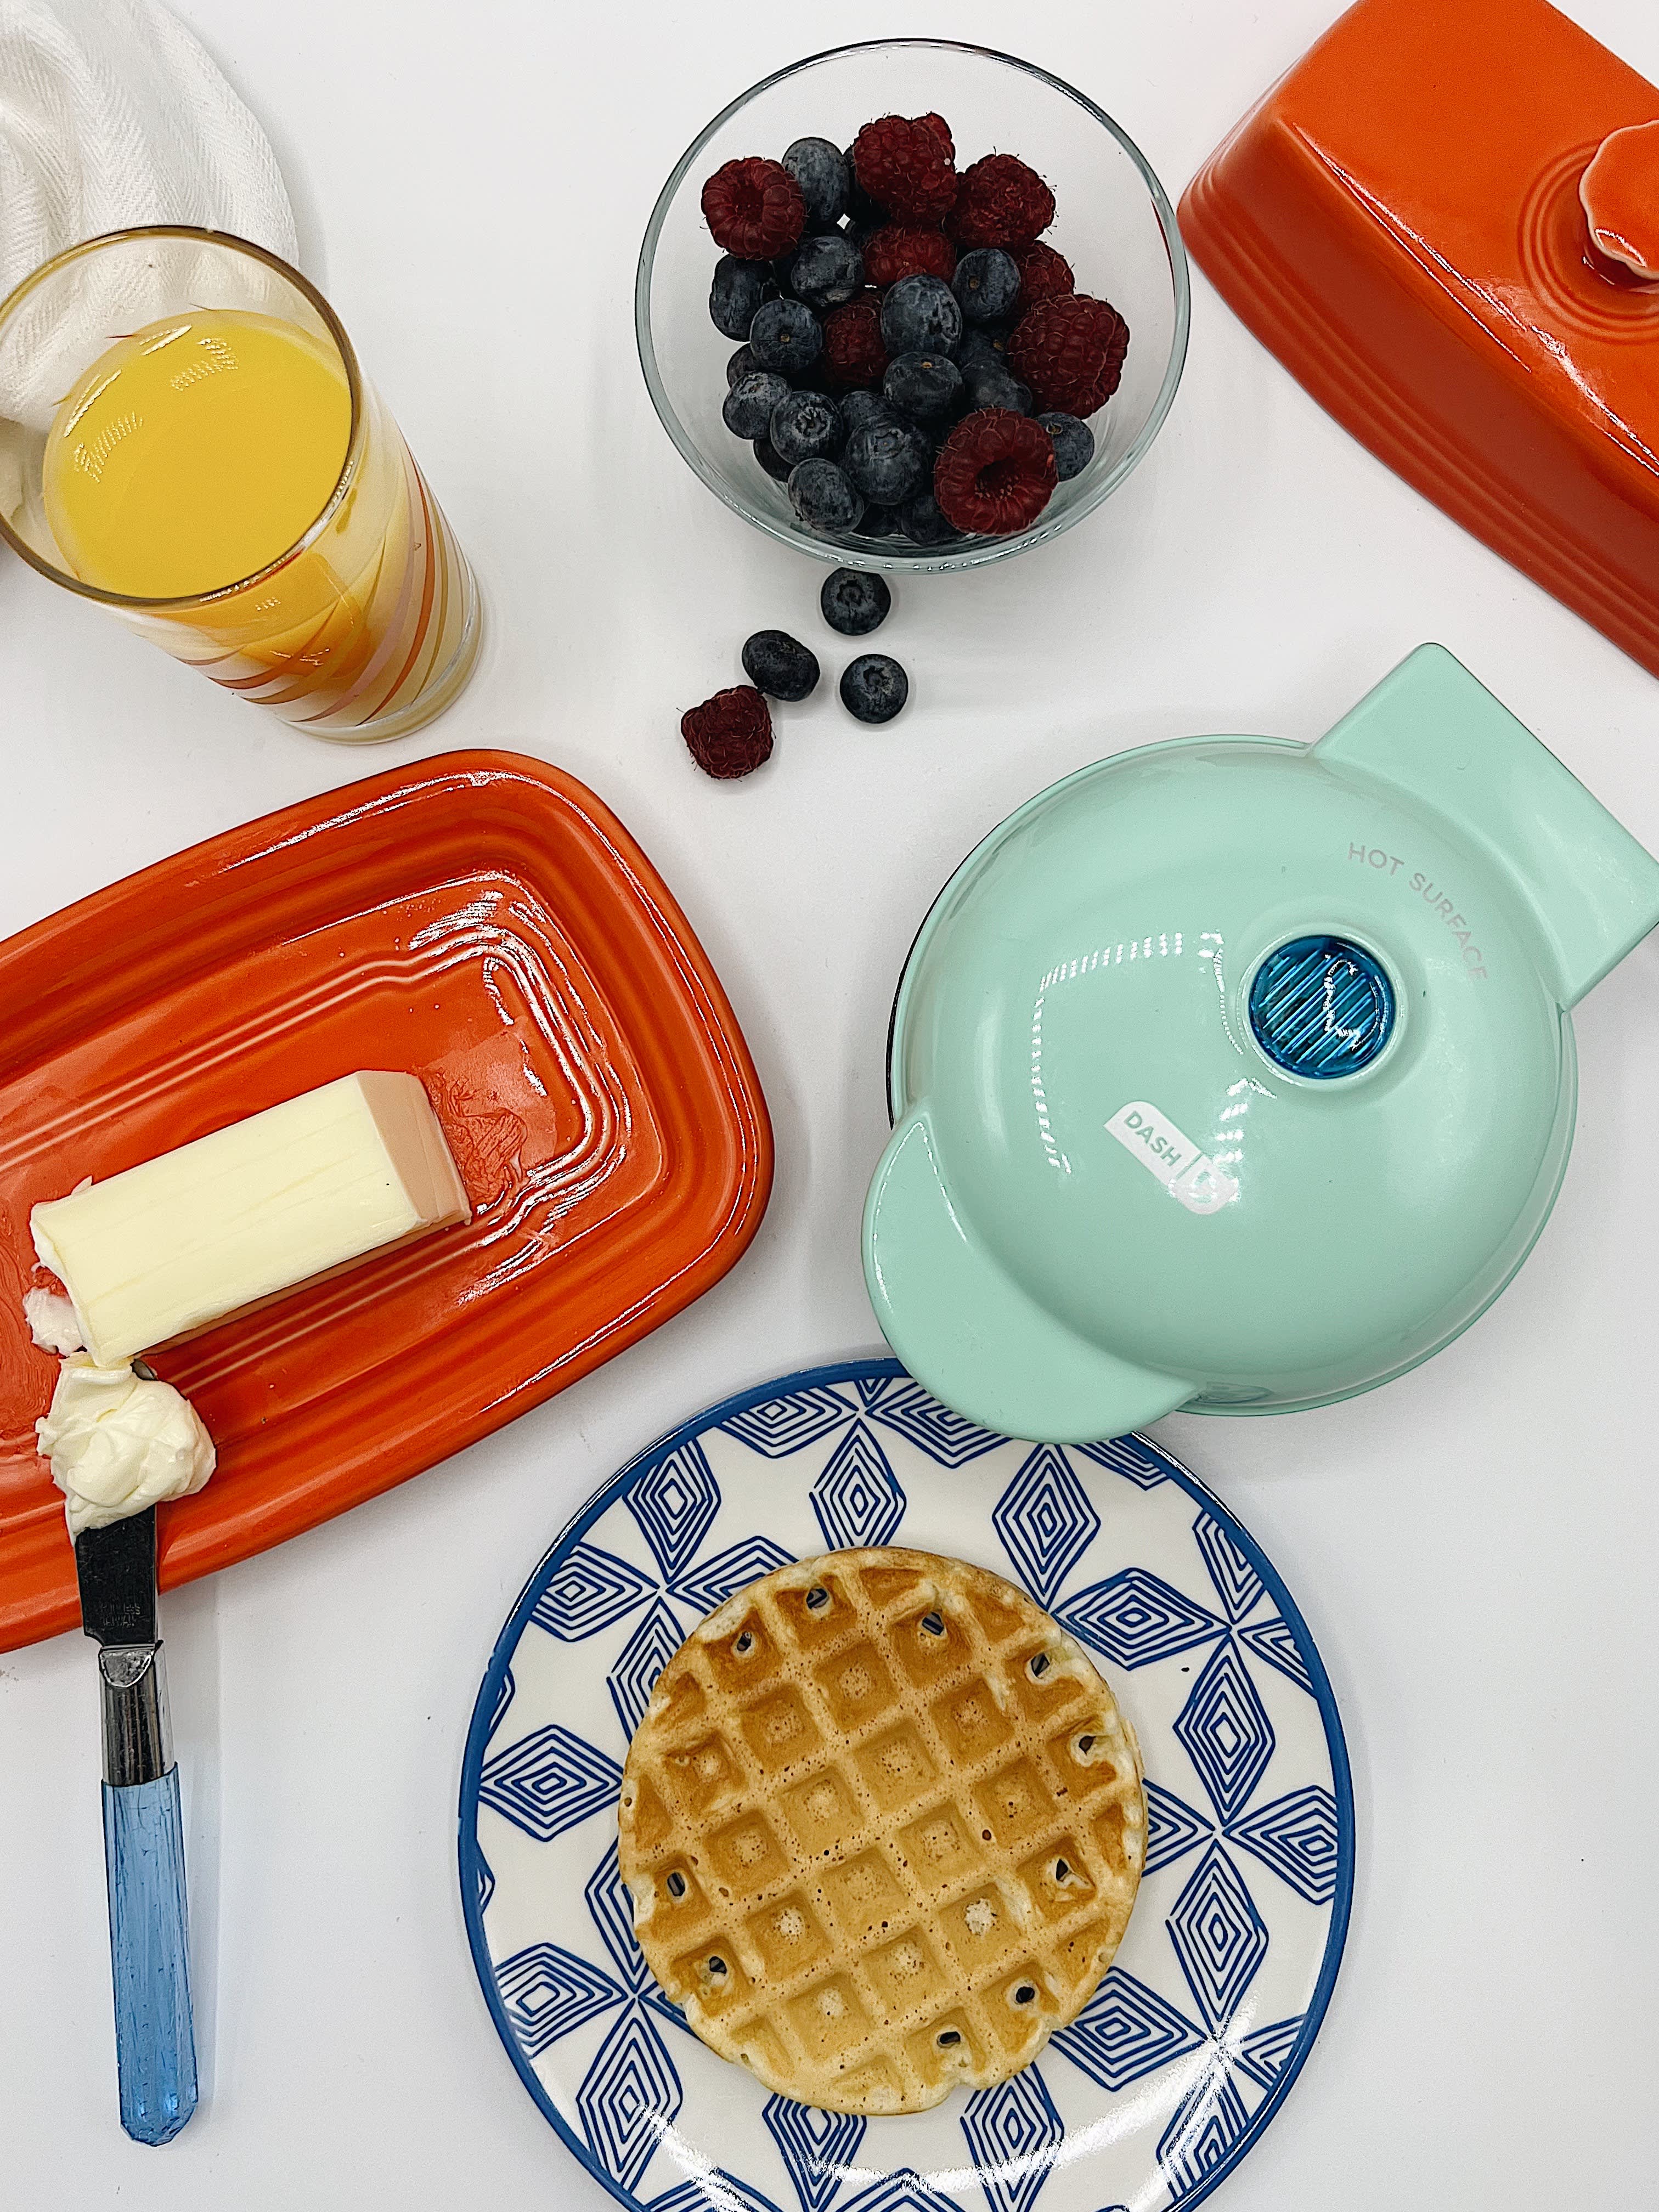 Dash Waffle Bowl Maker Review, FN Dish - Behind-the-Scenes, Food Trends,  and Best Recipes : Food Network